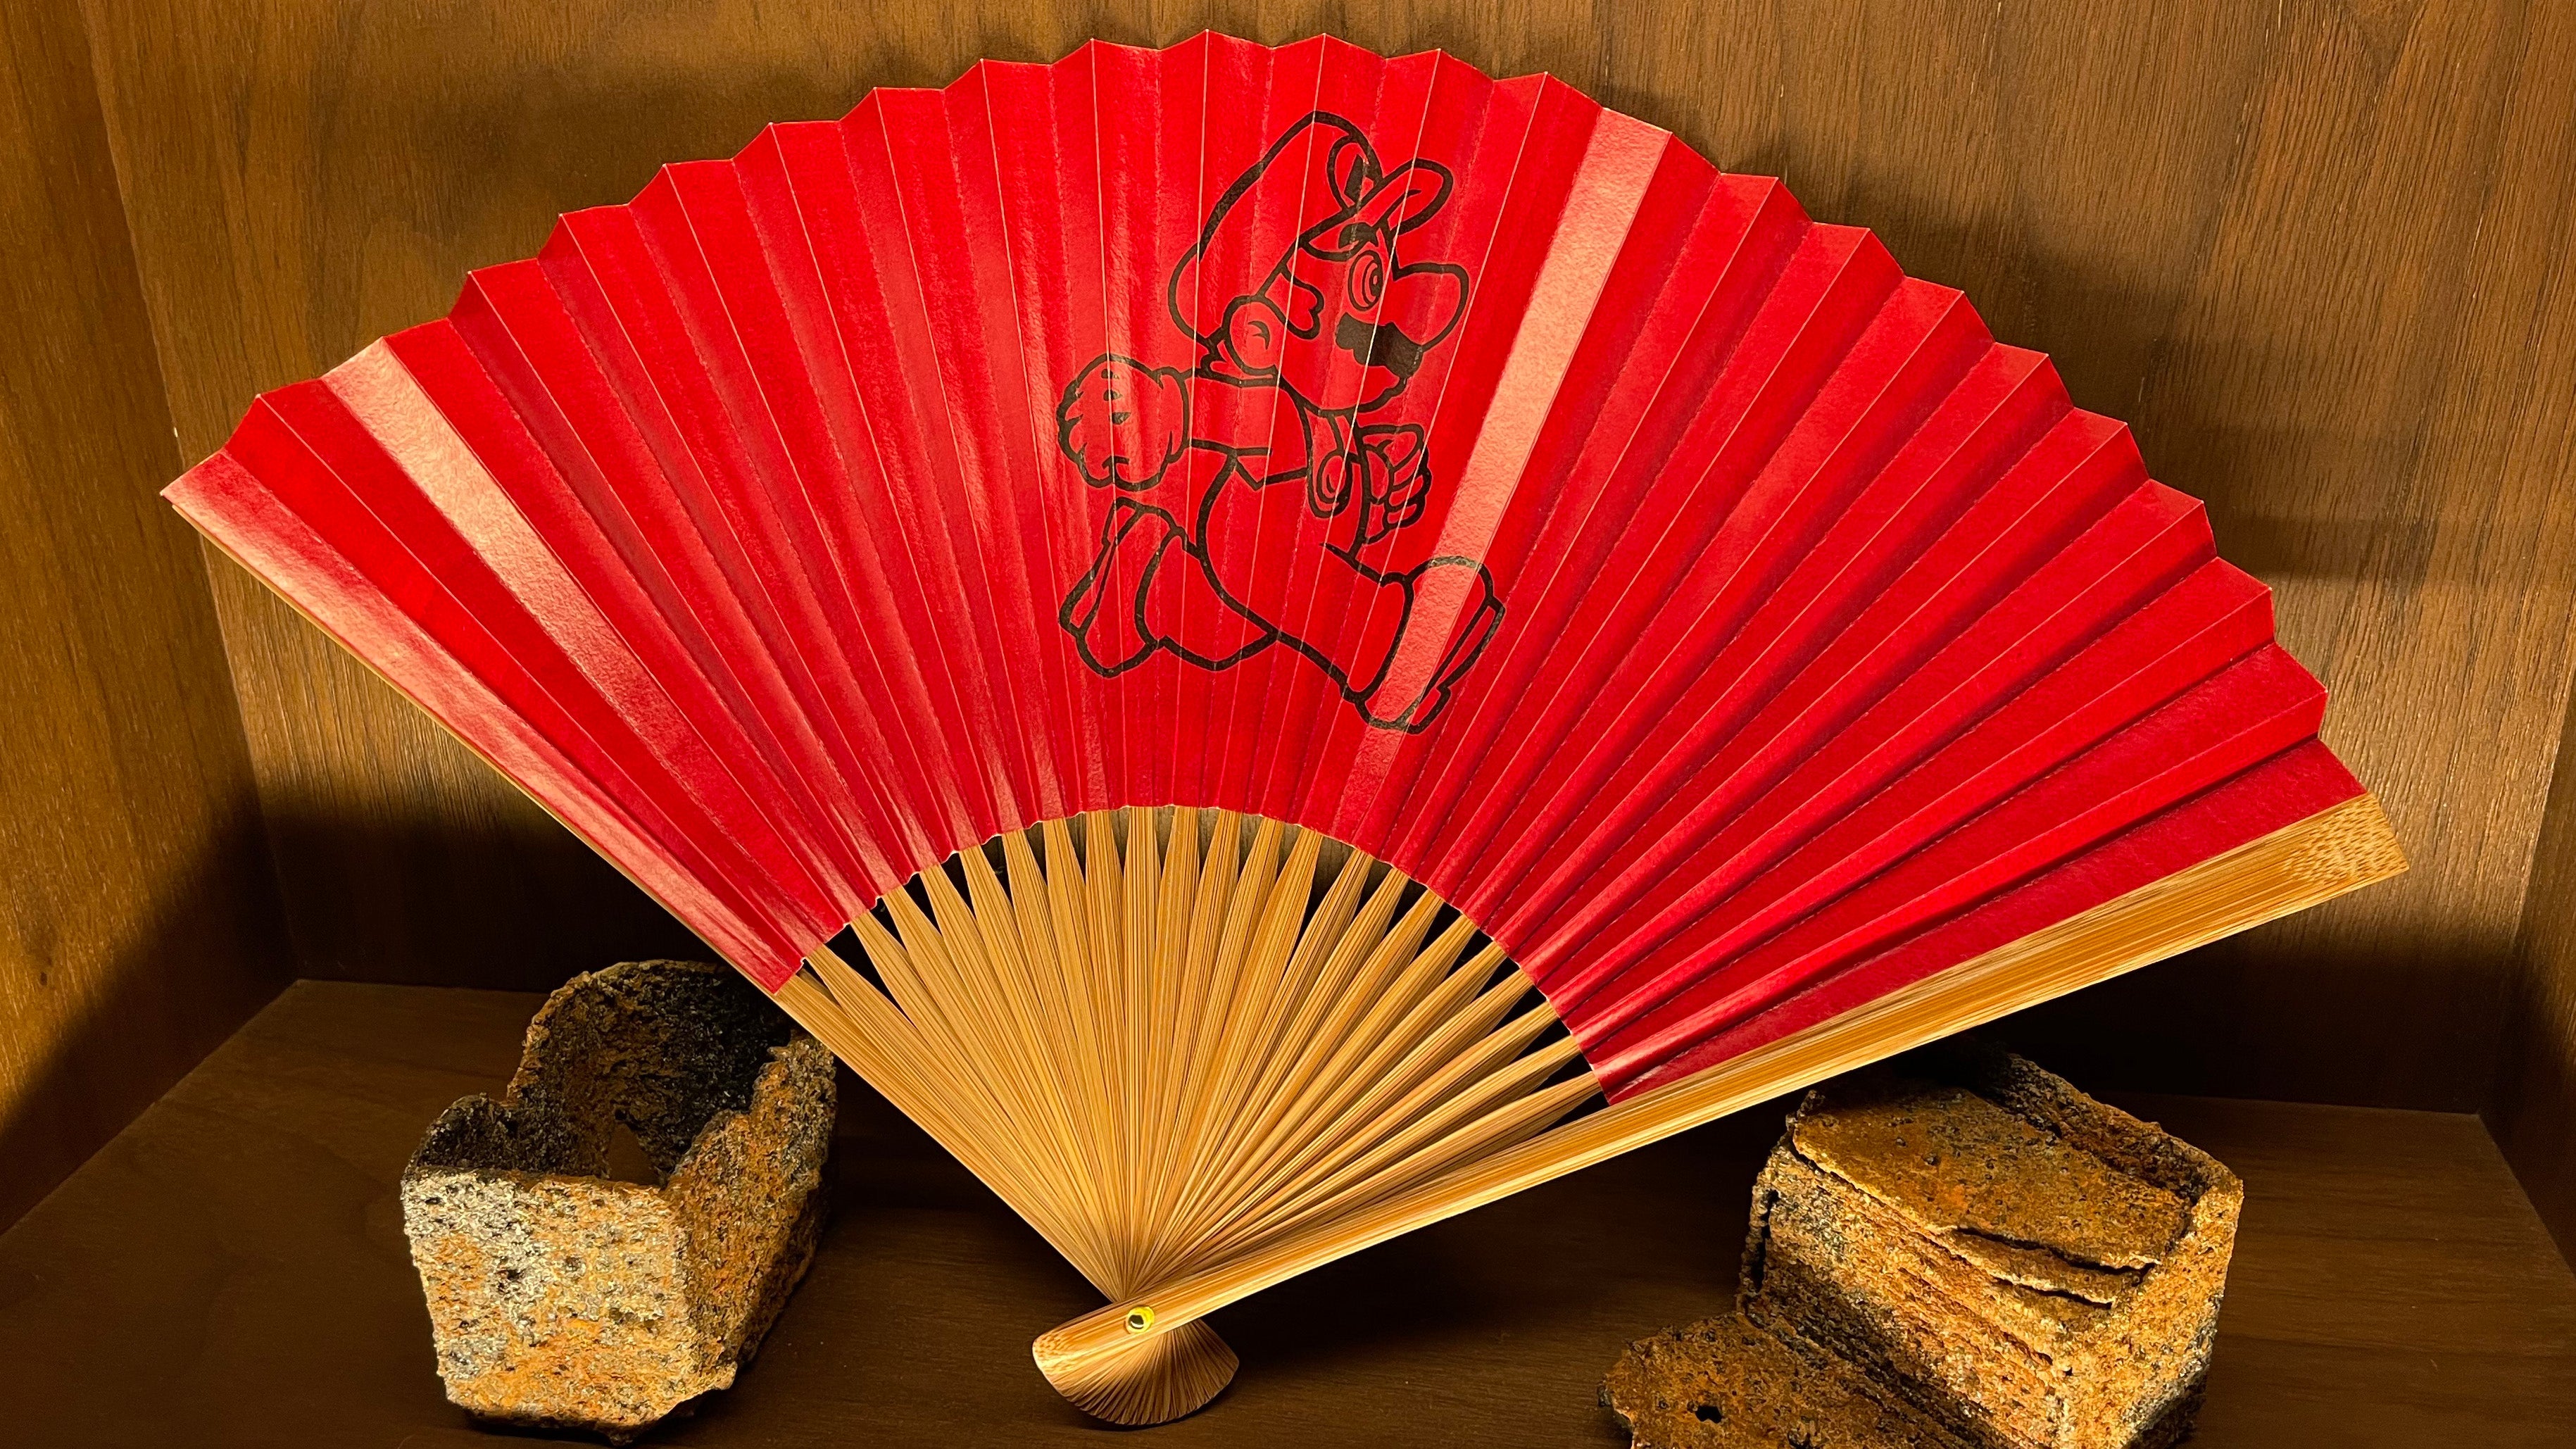 A wooden fan spread open and occupying a bookshelf. Two-thirds of the fan is coloured red, and in the middle of the fan-spread is a picture of Mario, in a running posture.